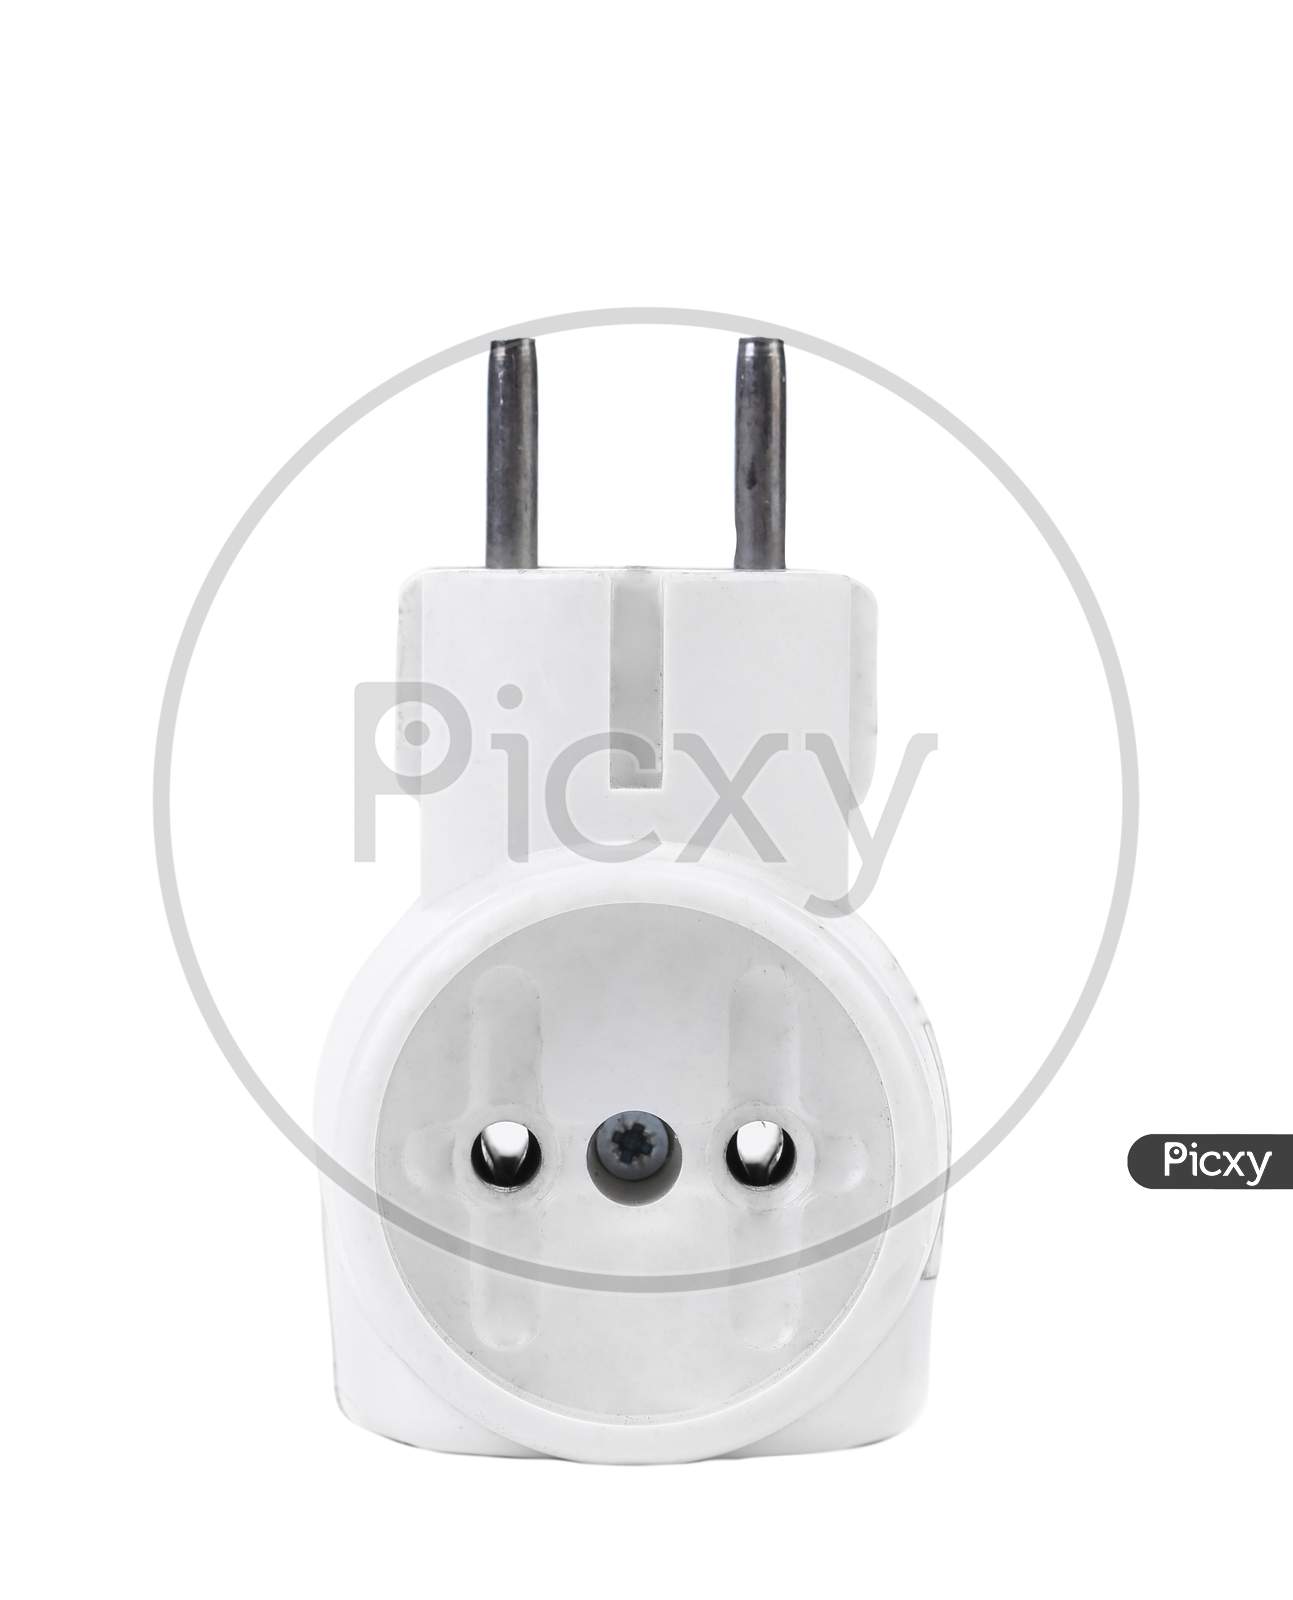 Contact Socket Splitter. Isolated On A White Background.